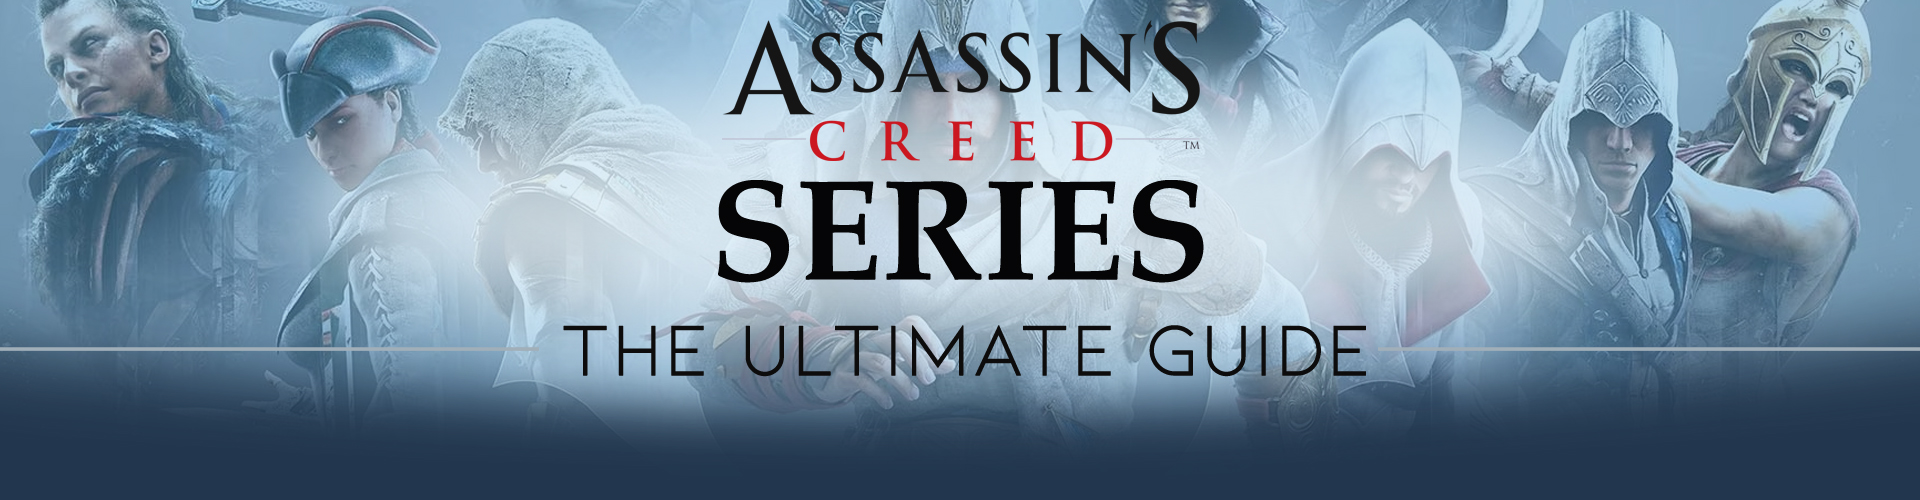 Assassin's Creed Serie